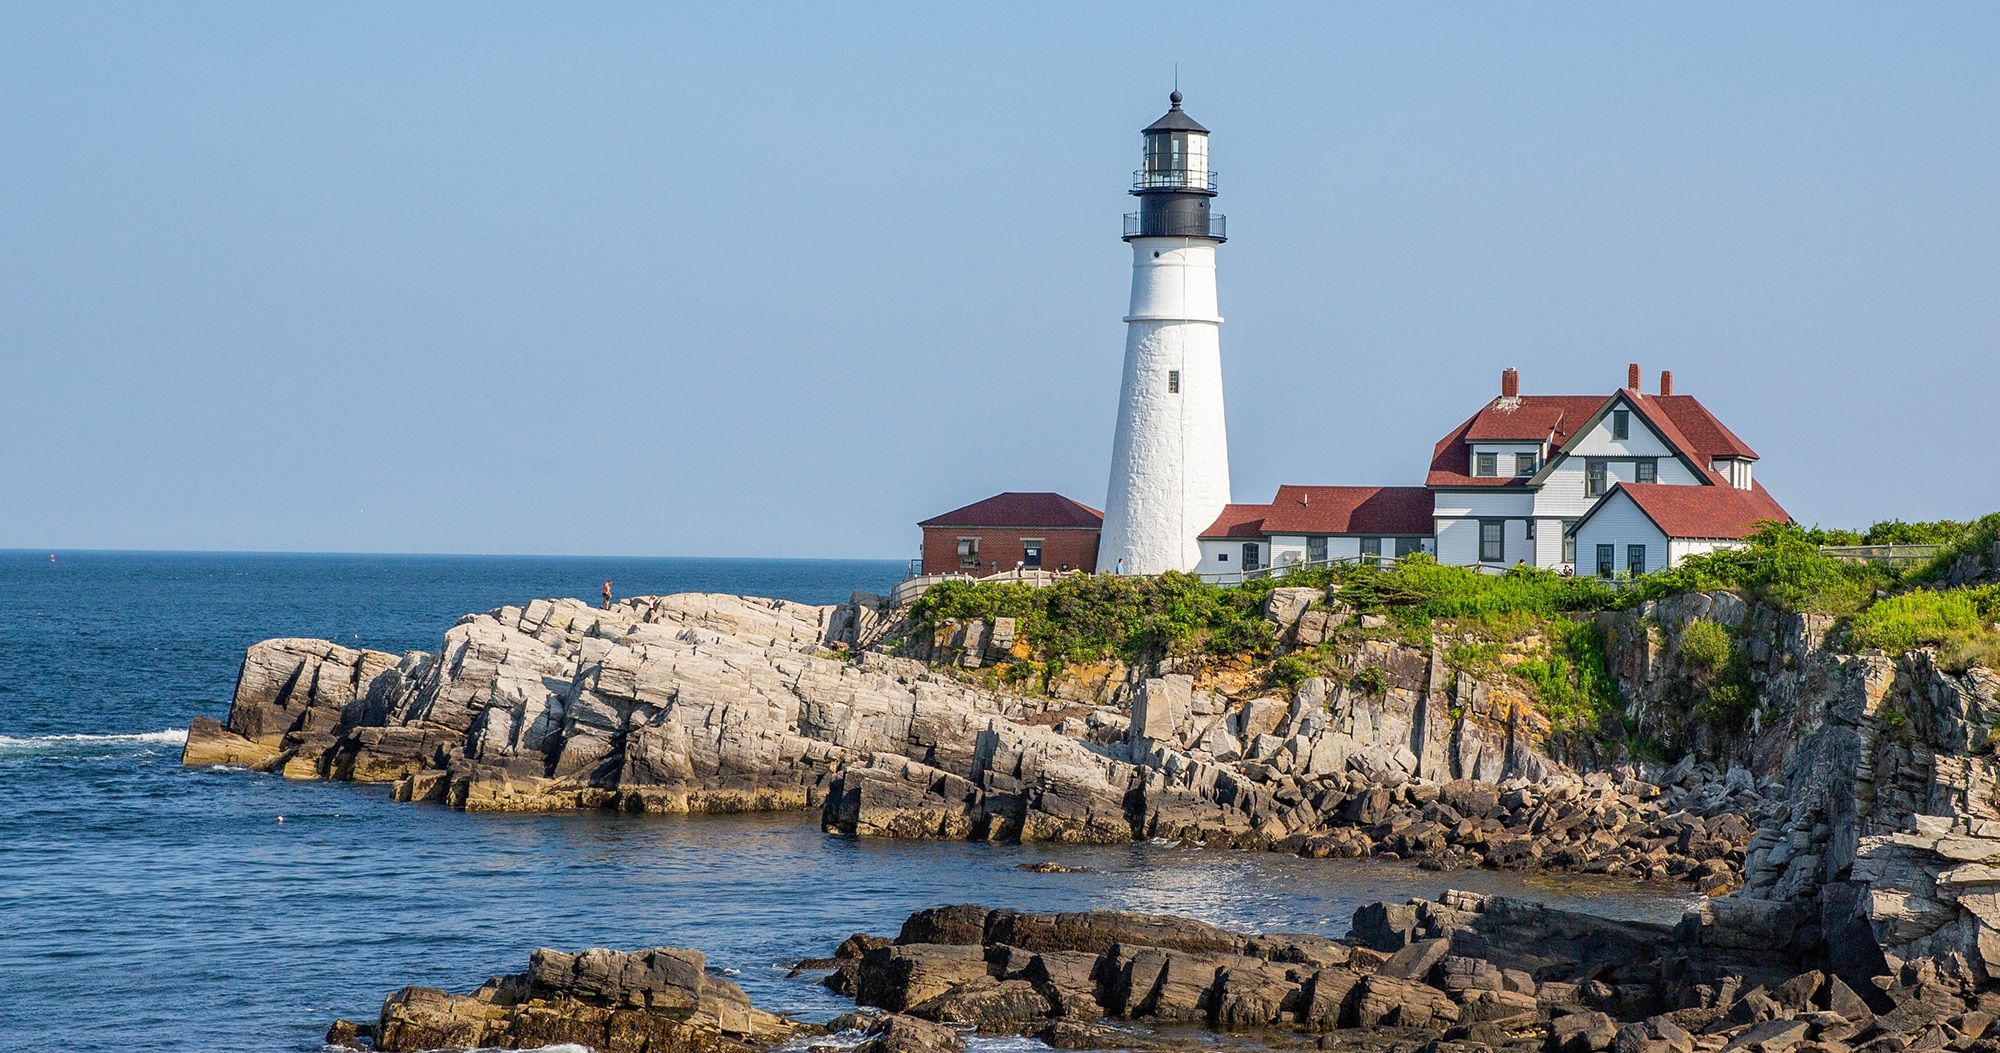 Featured image for “Cape Elizabeth, Maine: Lighthouses, Lobster Rolls & Beaches”